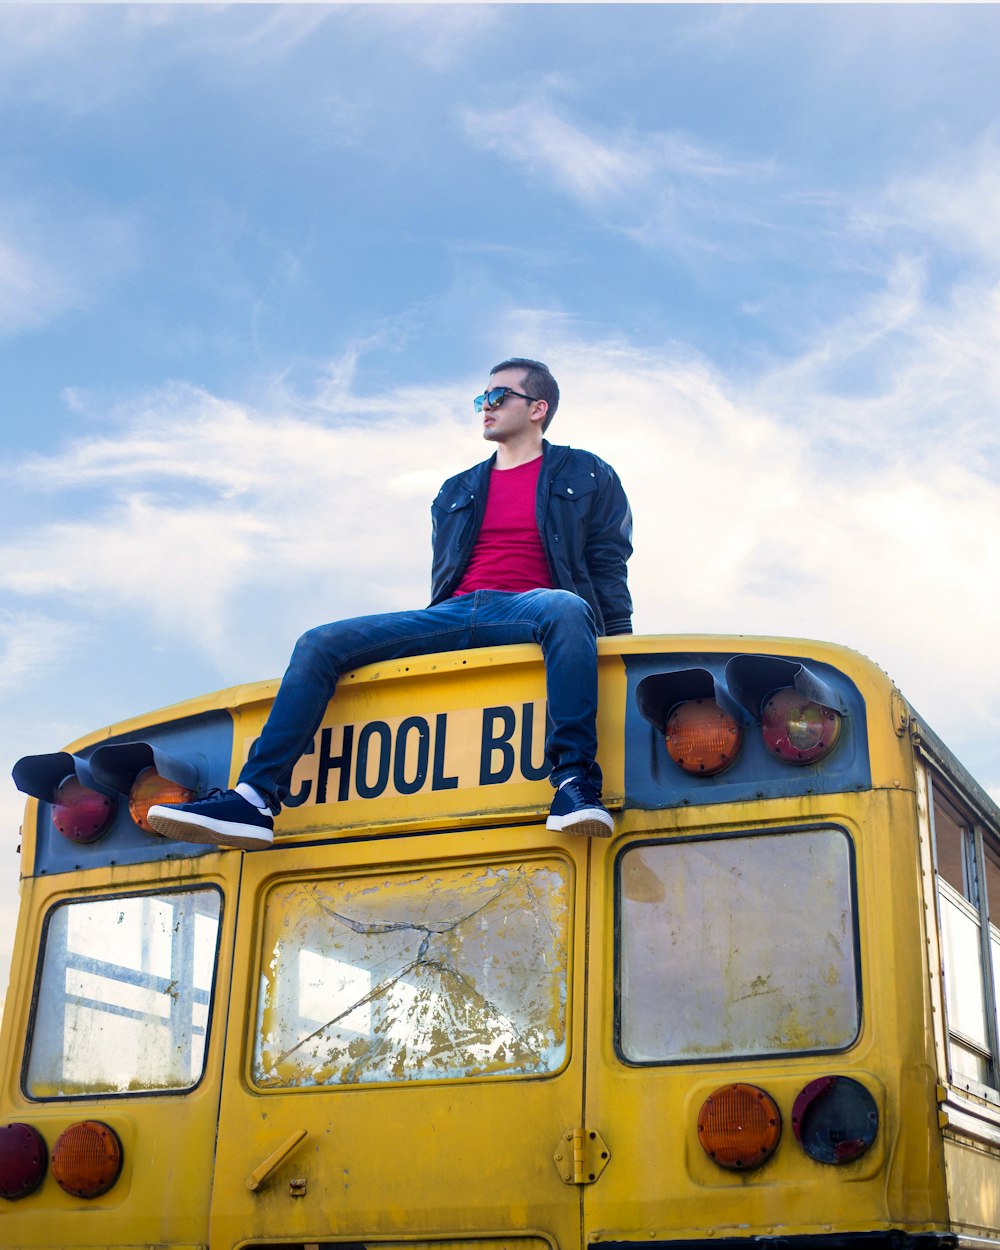 man in blue jacket standing beside yellow school bus under white clouds during daytime